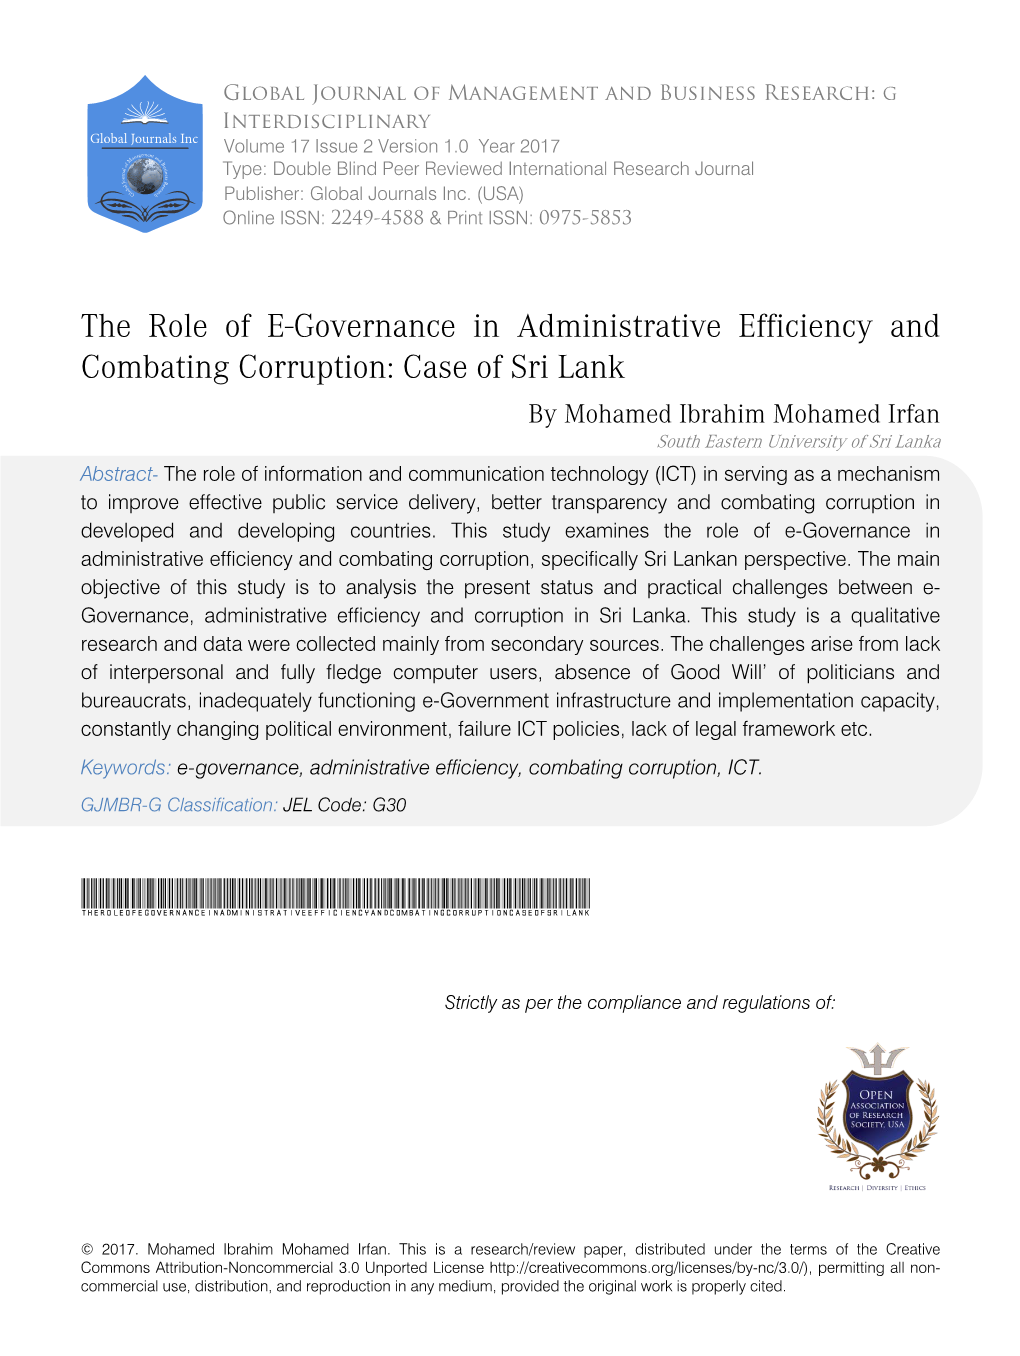 The Role of E-Governance in Administrative Efficiency and Combating Corruption